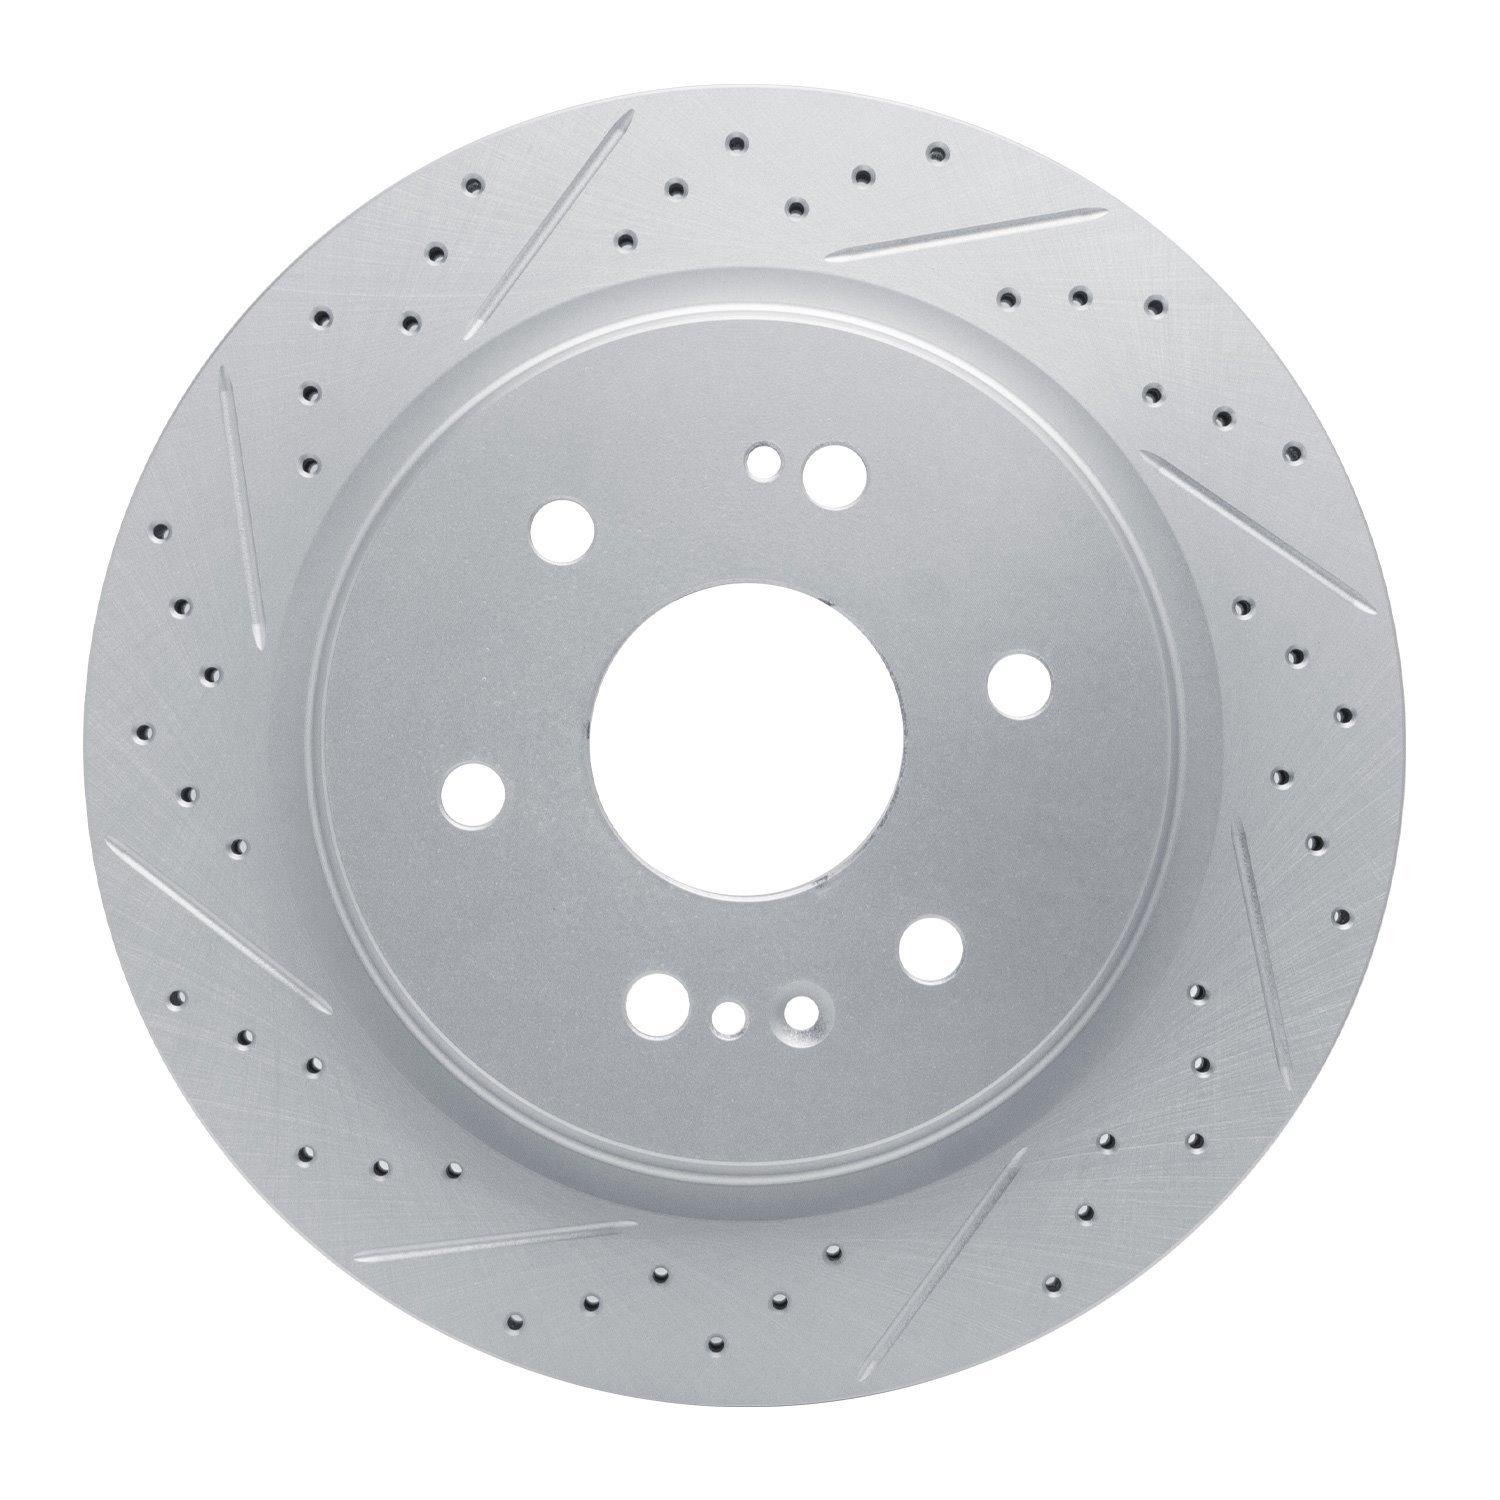 830-47081L Geoperformance Drilled/Slotted Brake Rotor, Fits Select GM, Position: Rear Left